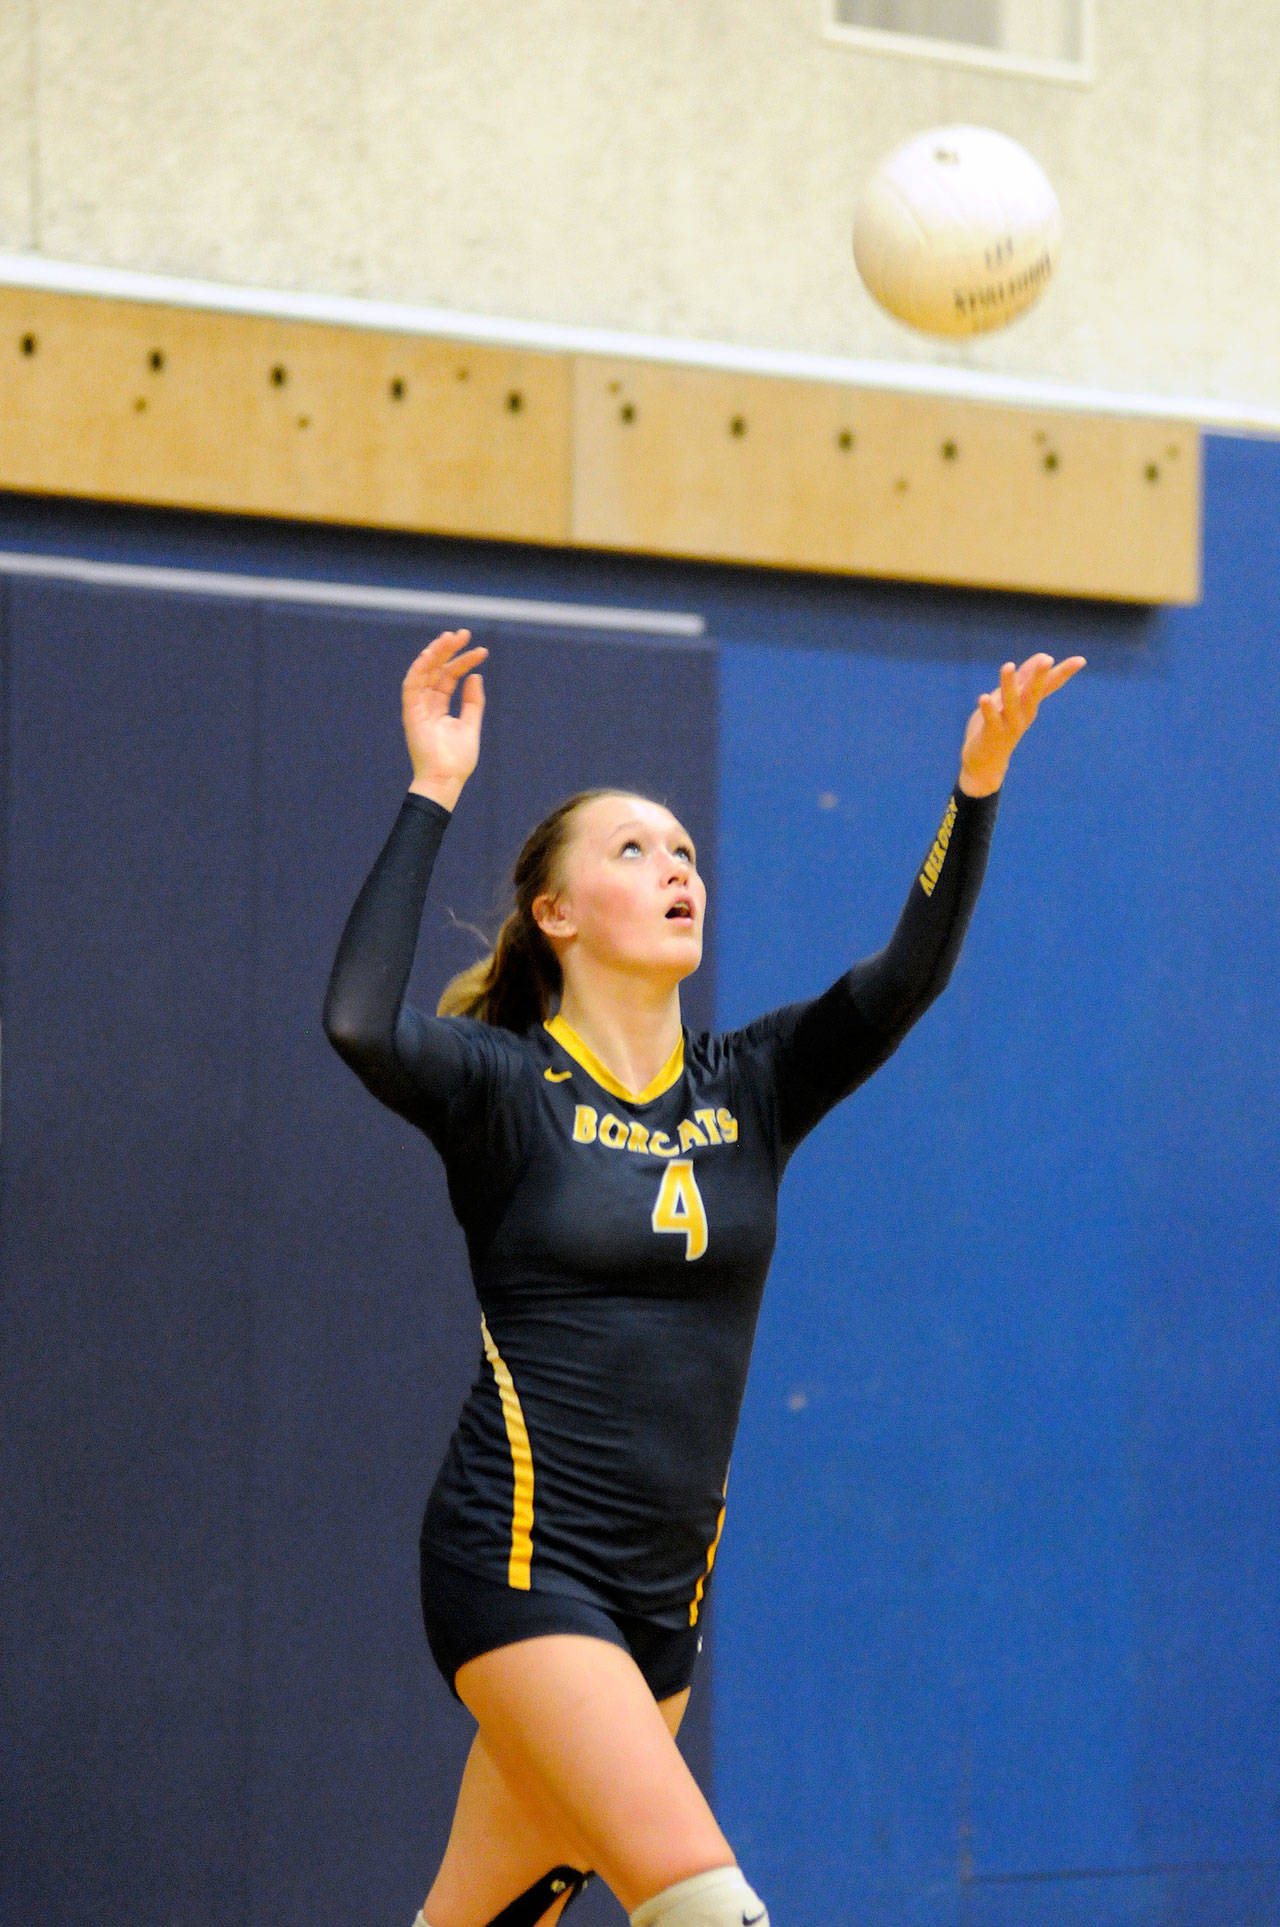 Aberdeen senior Kennedy Pruett, seen here in a file photo, was named to the 2A Evergreen League’s Second Team after leading the Bobcats with 113 kills and 22 blocks in 2019. (Ryan Sparks | Grays Harbor News Group)